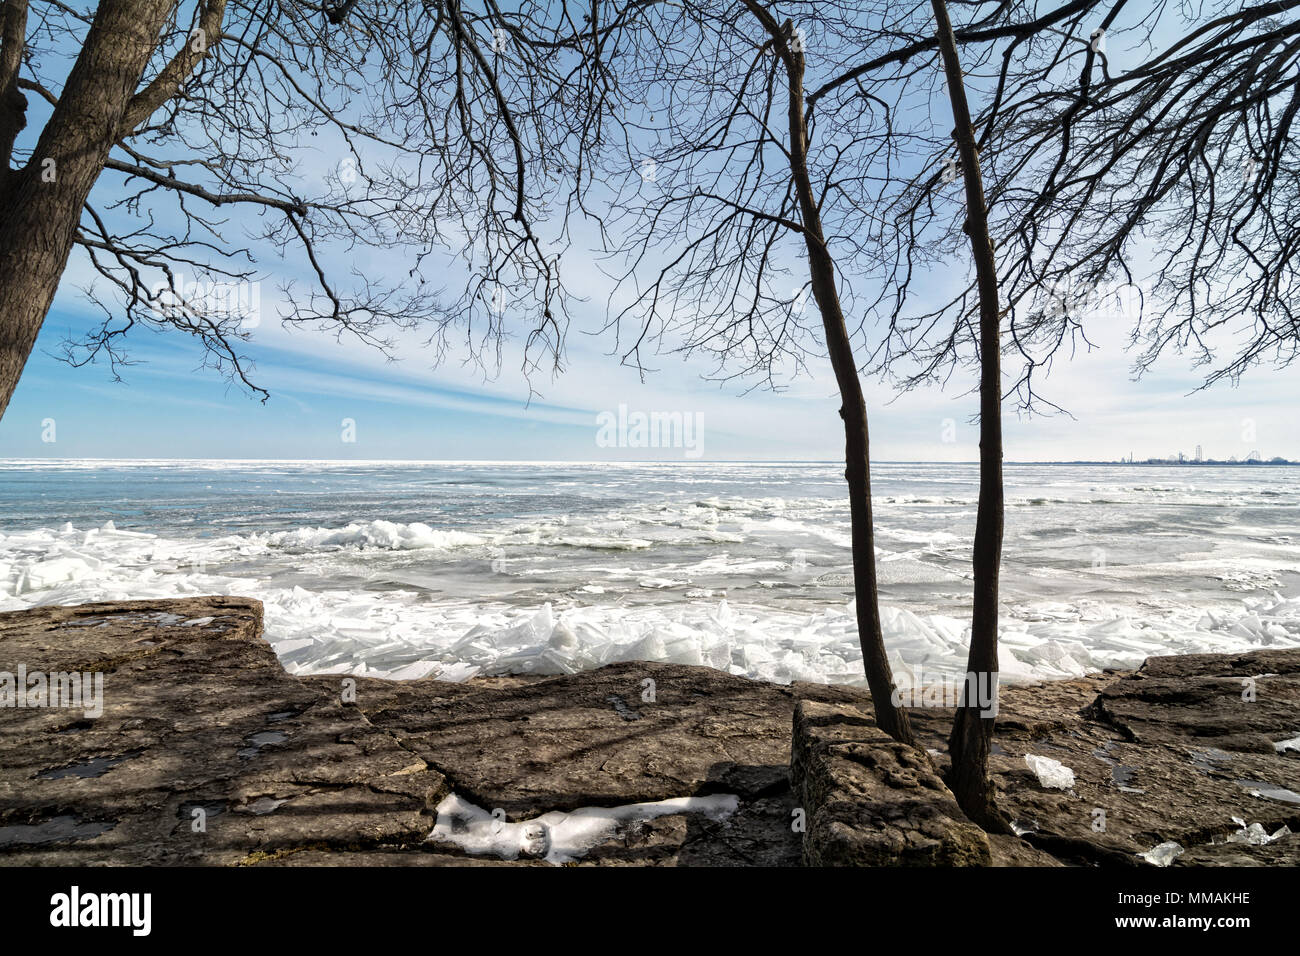 The icy, cold and rocky shore of Lake Erie In Northwest Ohio. Stock Photo